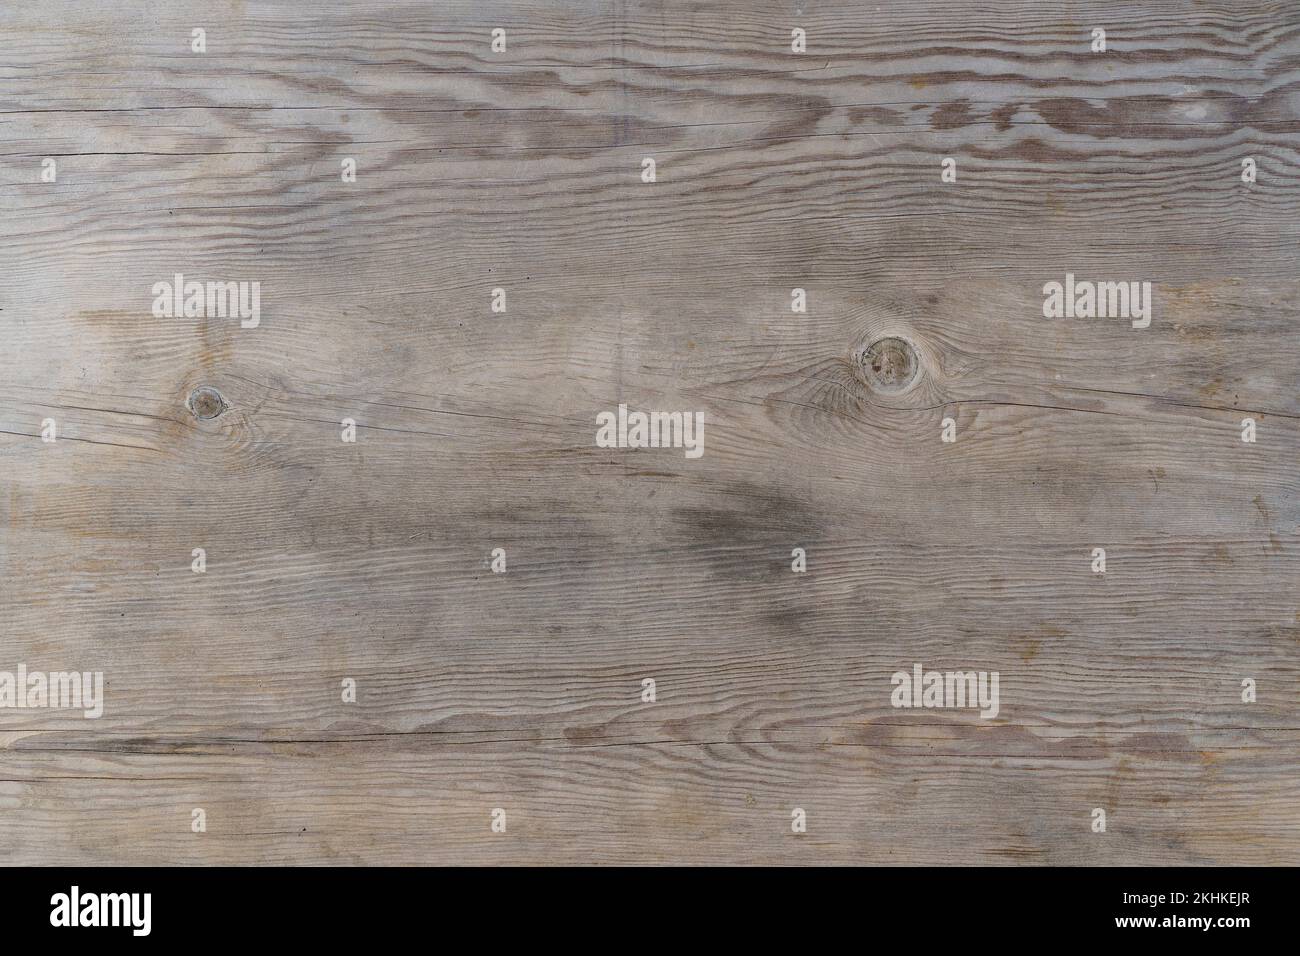 Hardwood texture background. Old wooden pattern surface for flooring, backdrop, material wall. High quality photo Stock Photo